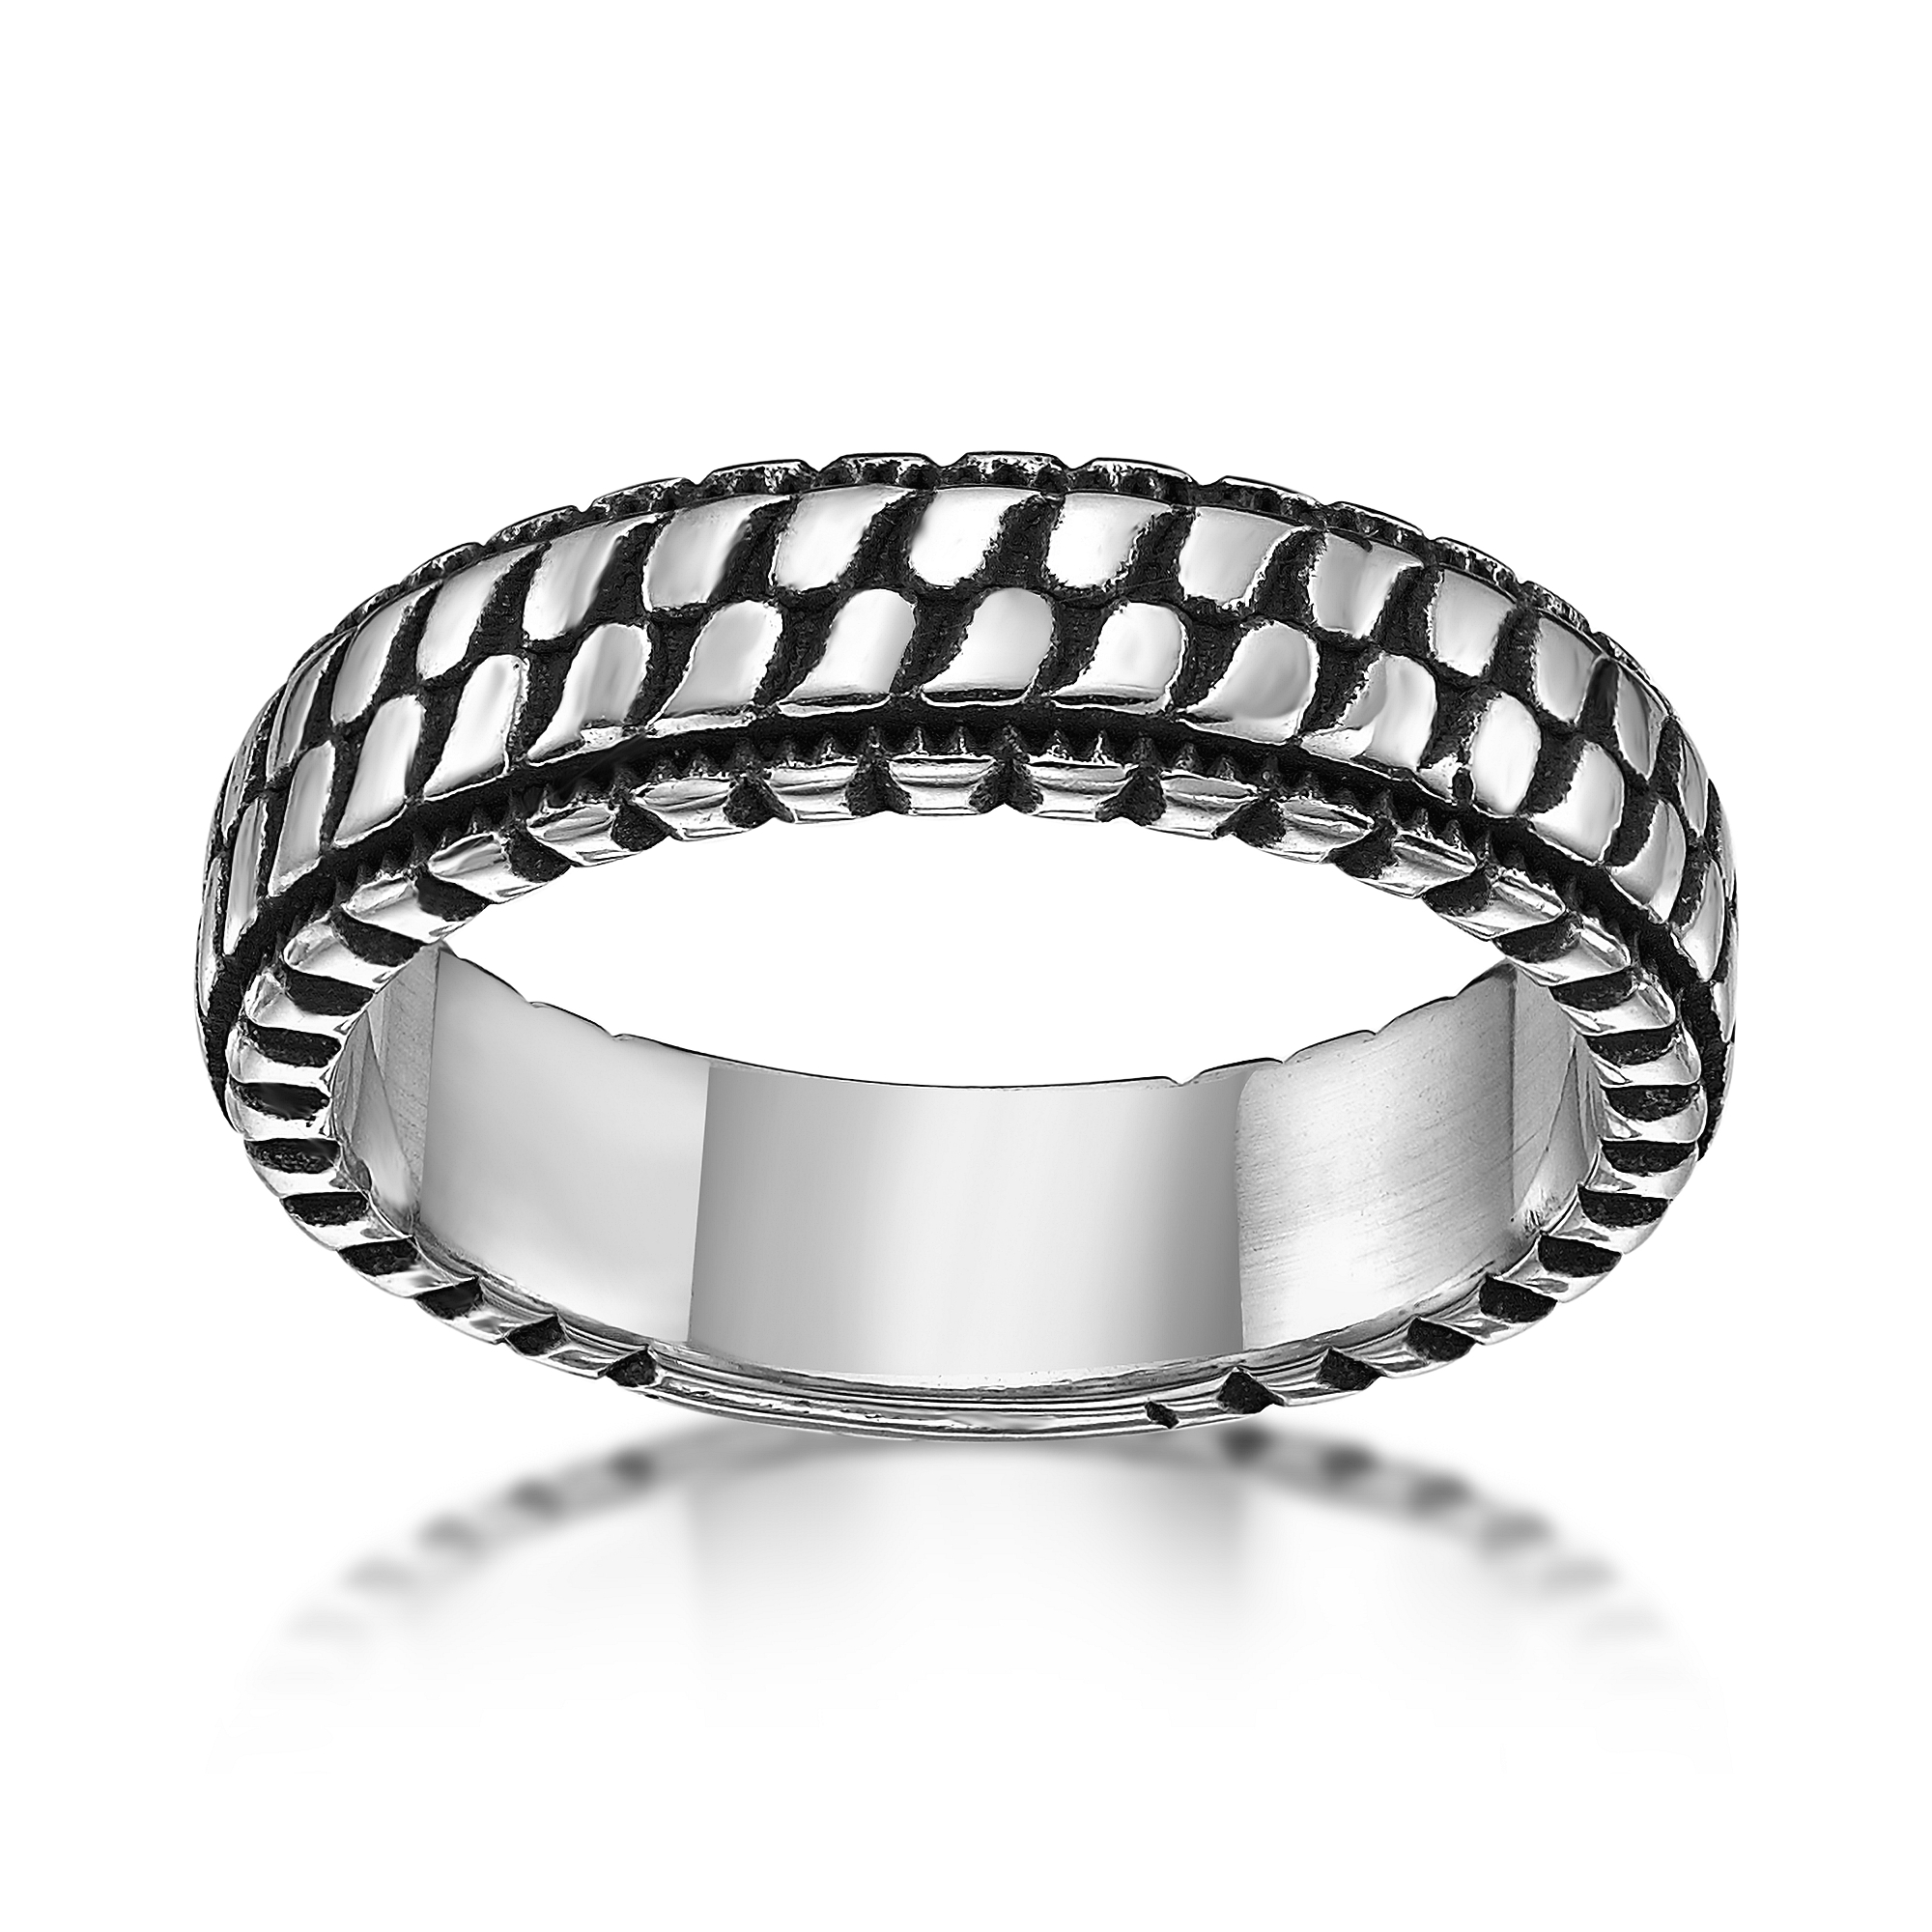 Men's Stainless Steel Ring 6.5MM Antique Finish     | Metro Jewelry